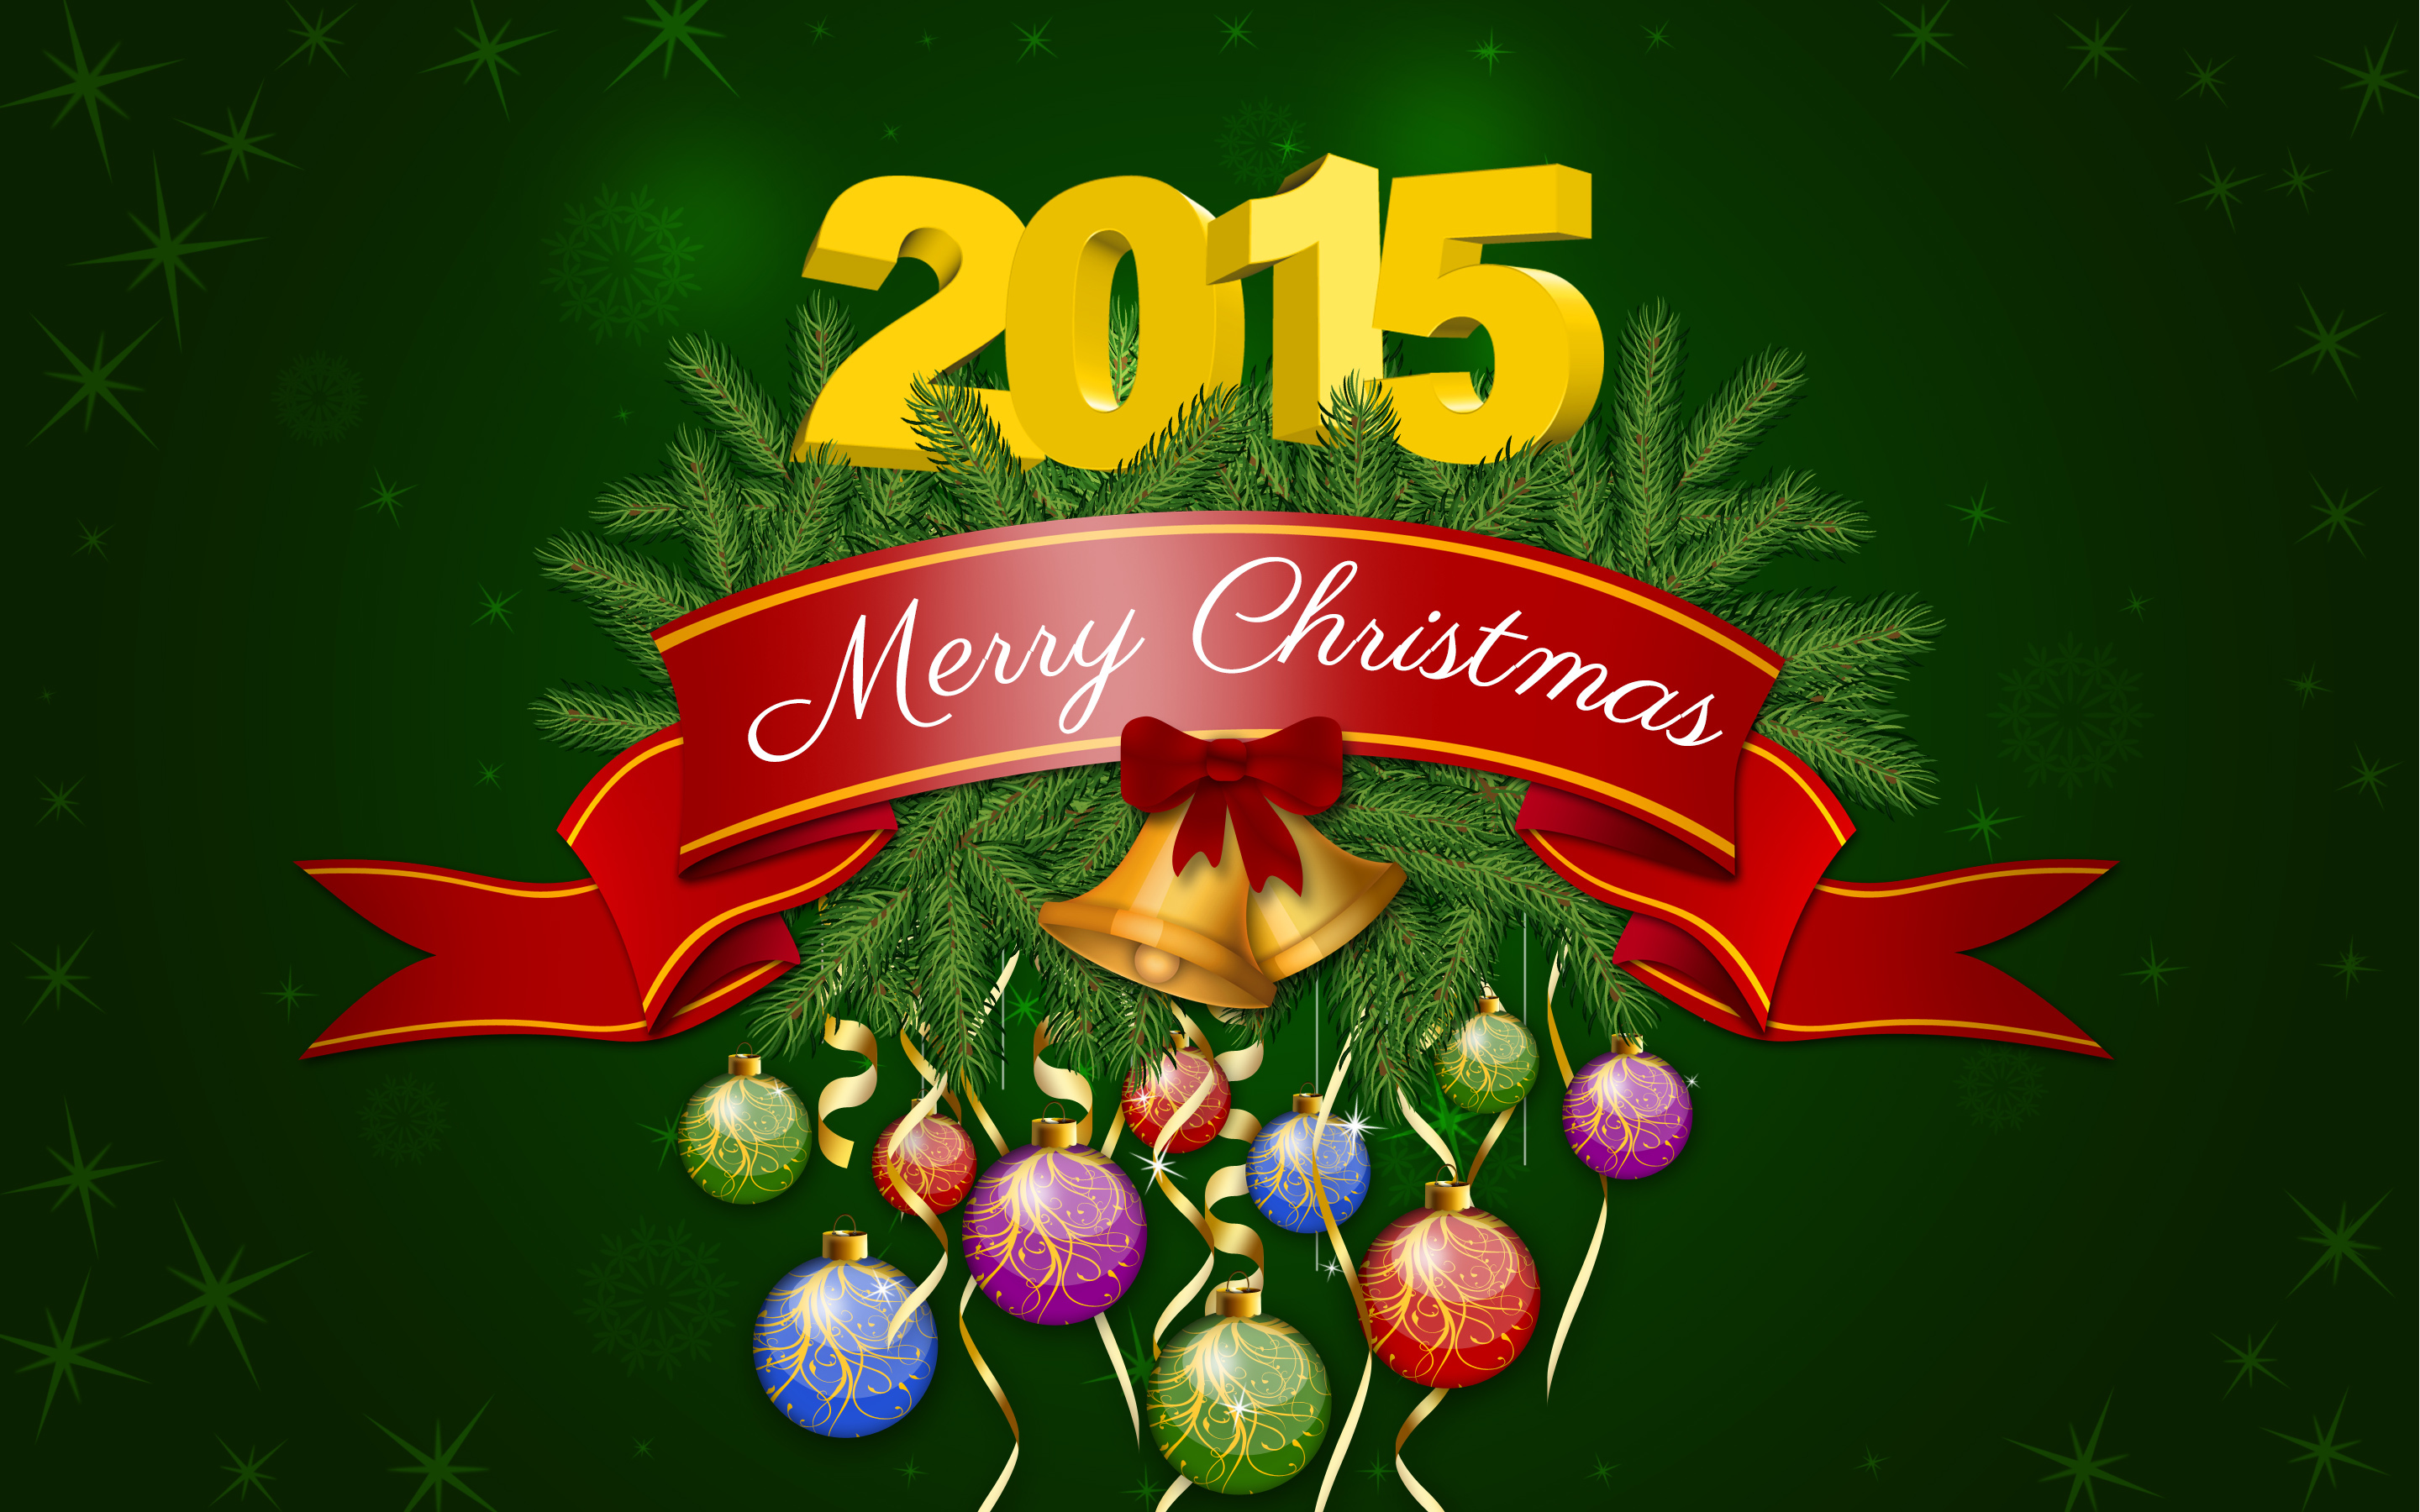 Merry Christmas 2015 Wishes HD Wallpaper